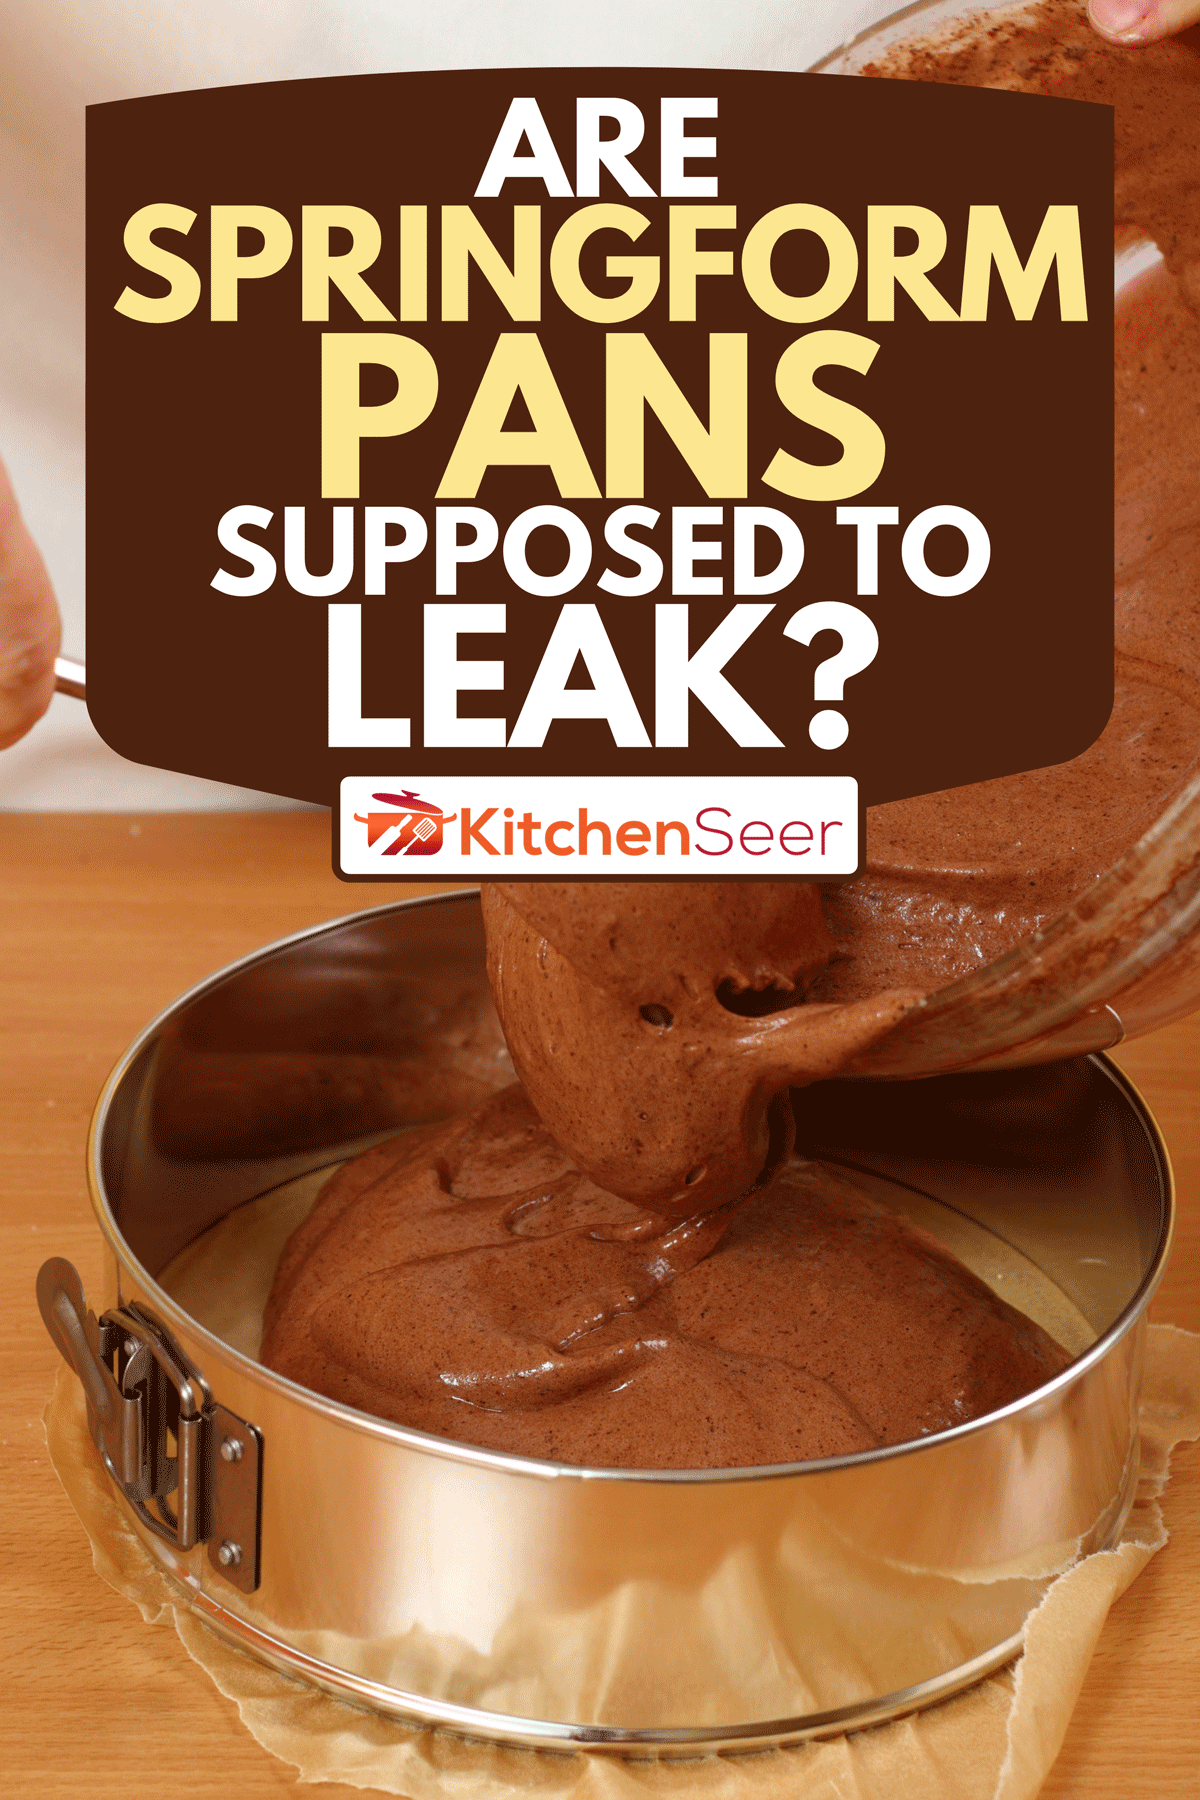 A pouring cake mix into baking tin, Are Springform Pans Supposed to Leak?